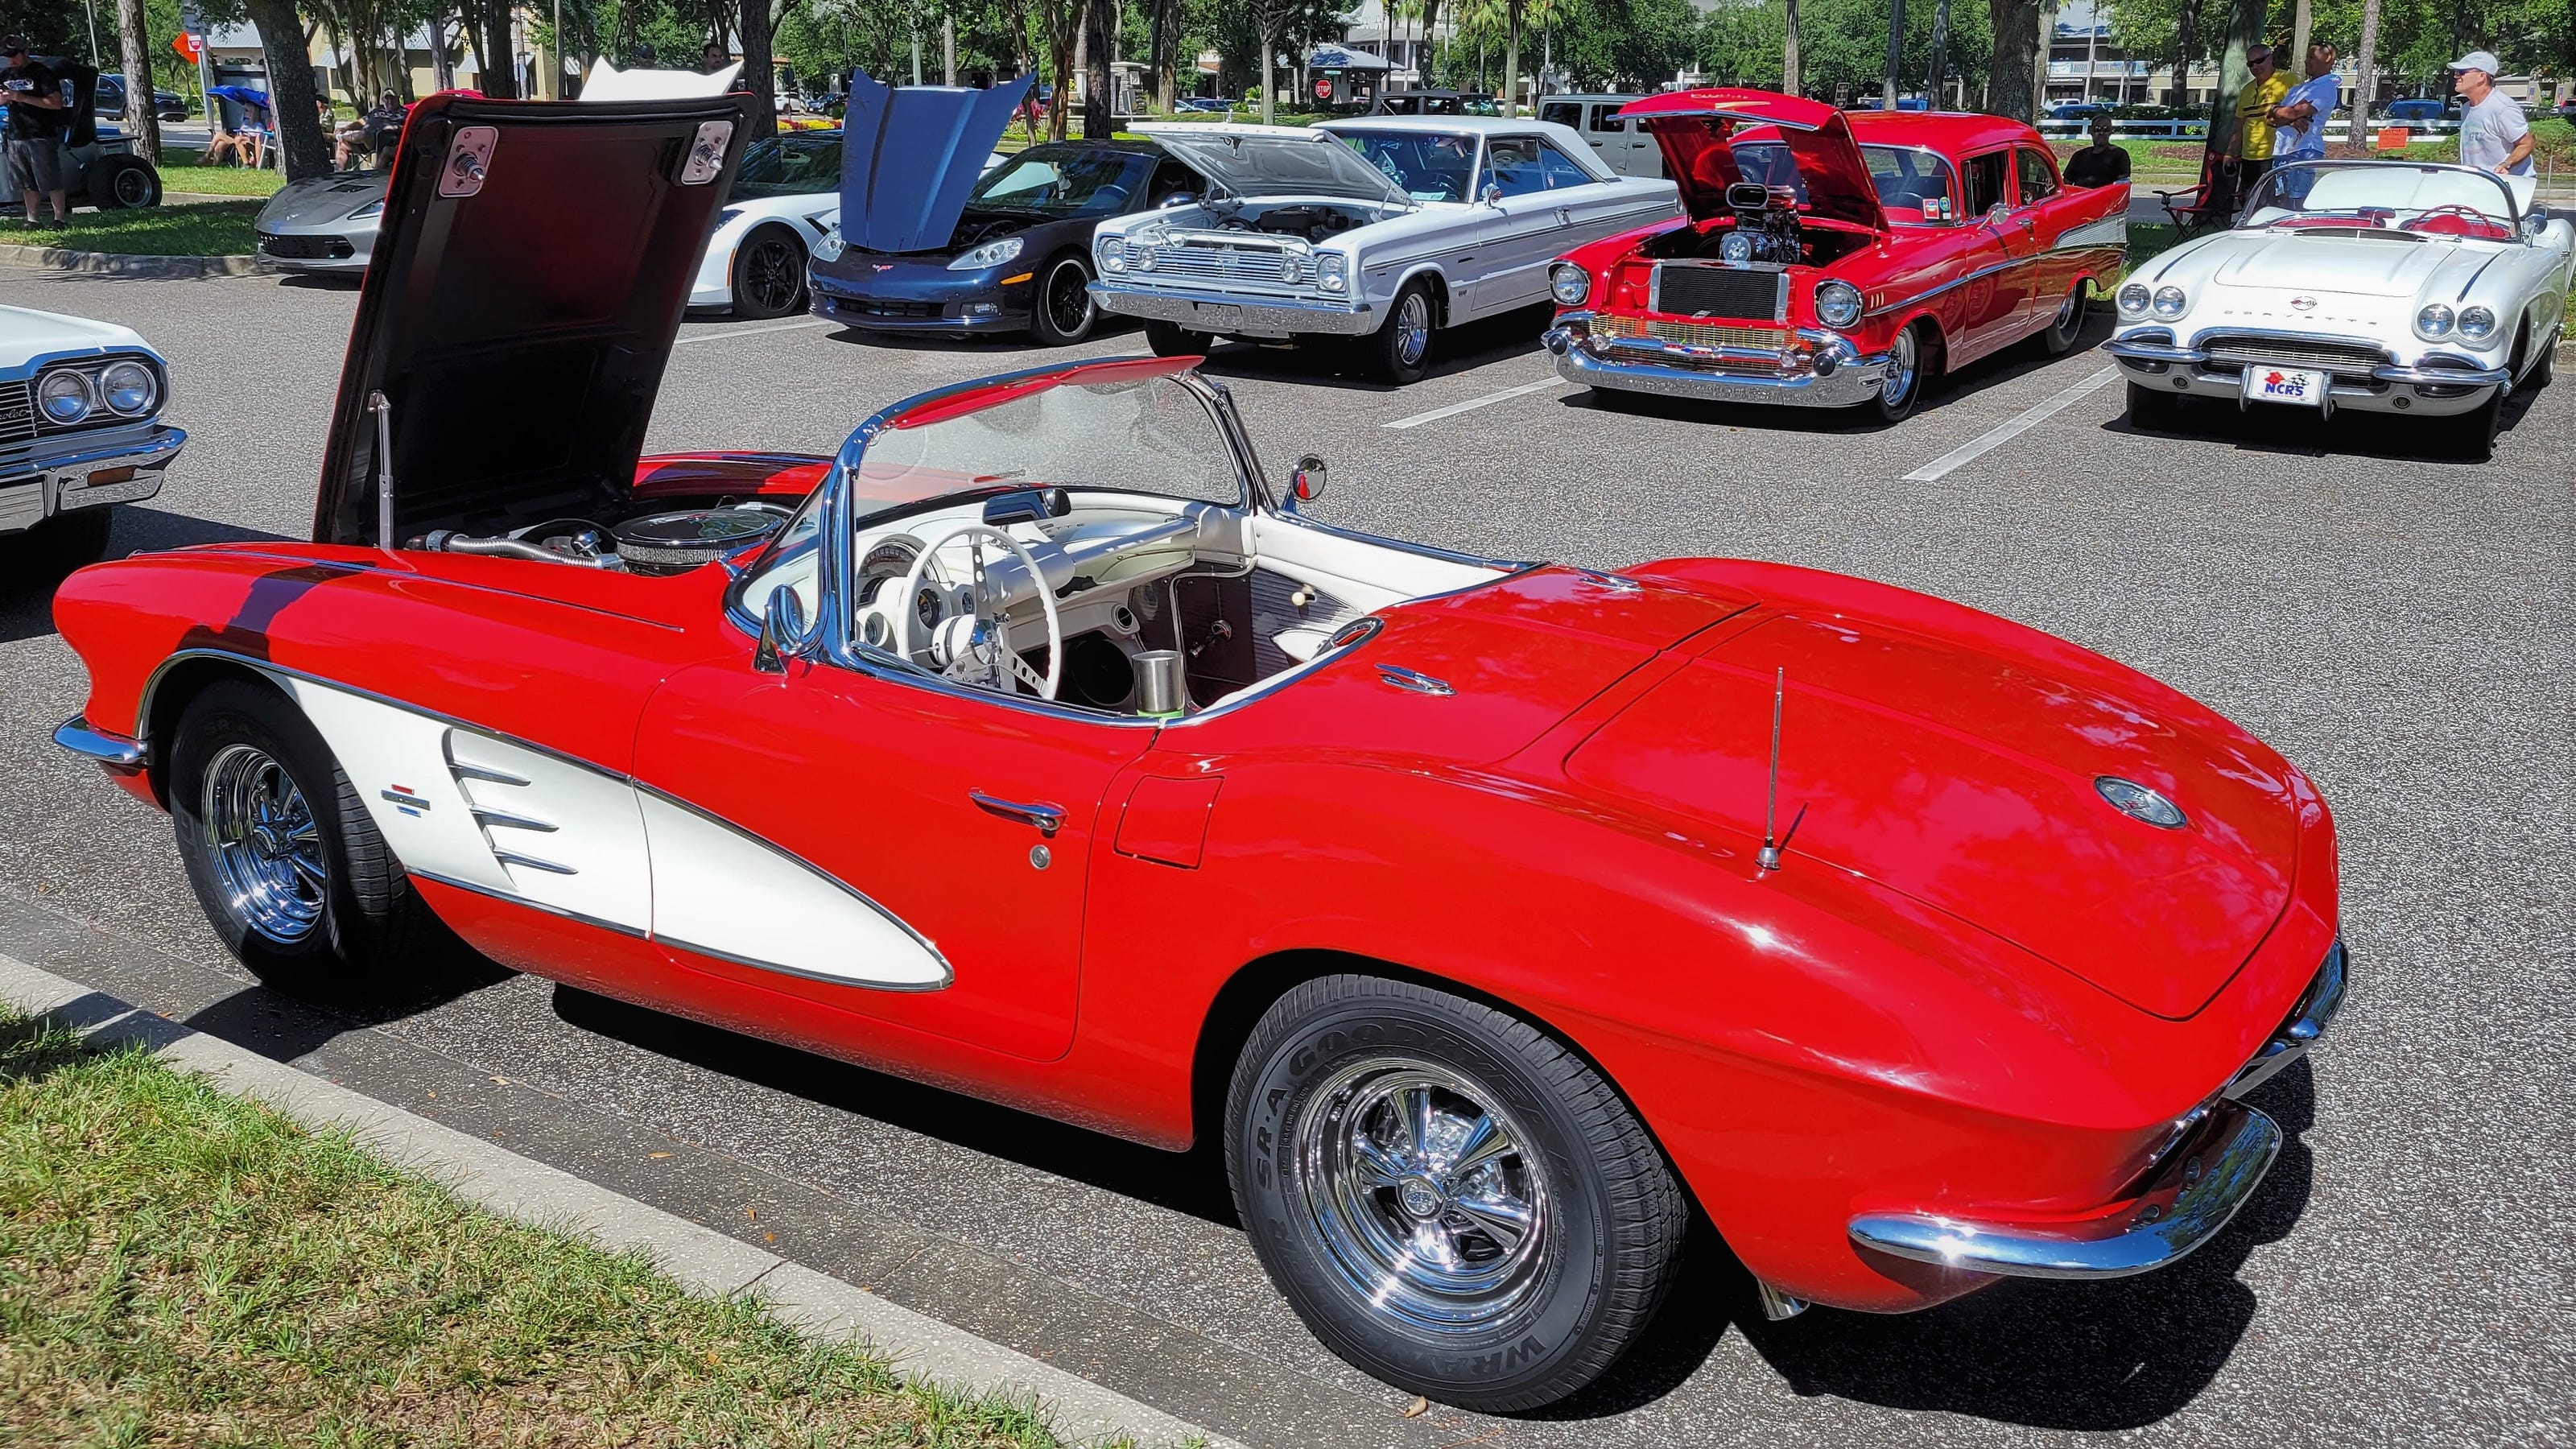 Jacksonville's car show and cruisein schedule filled with events